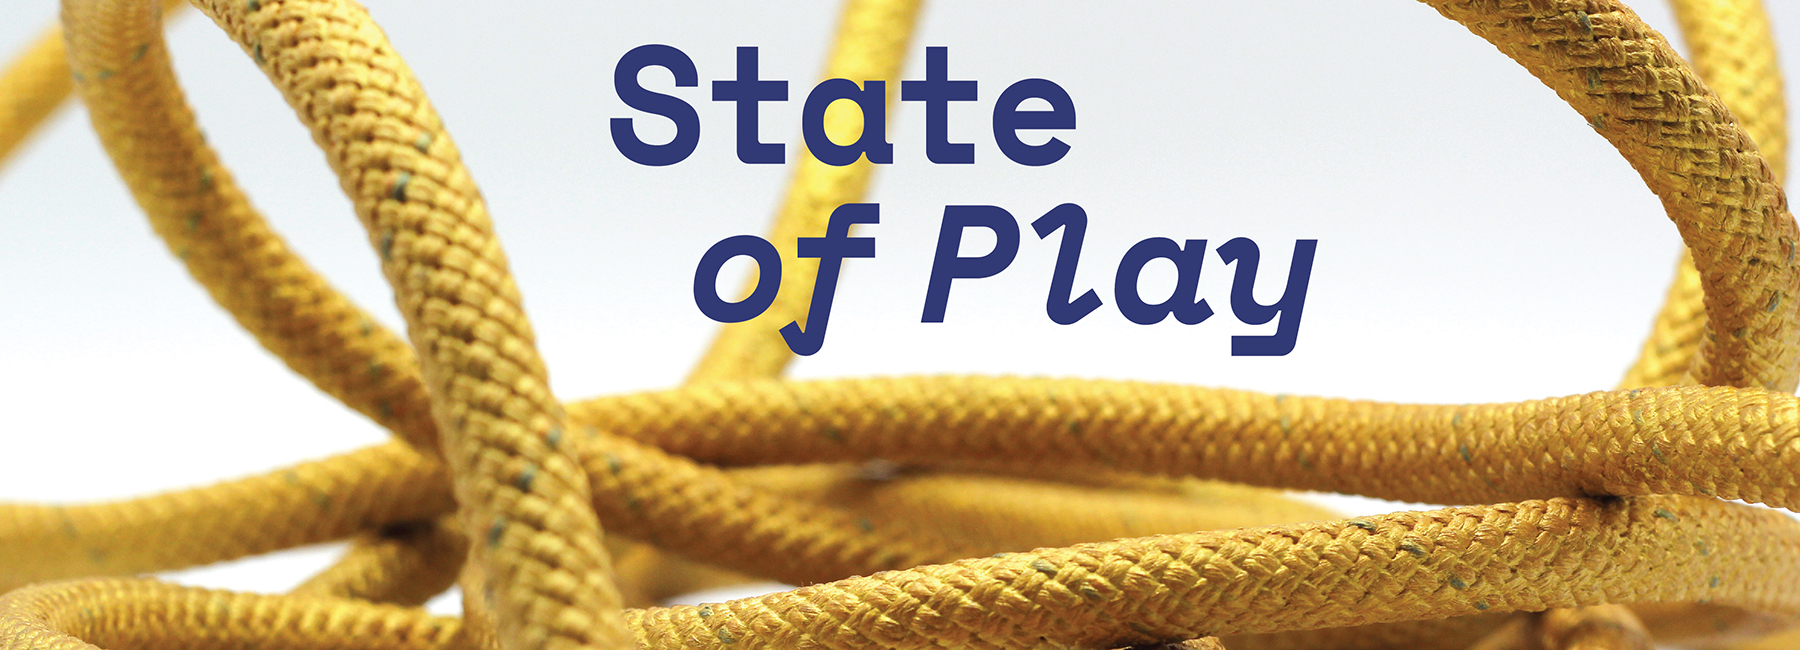 "State of Play" with yellow rope wrapped around text